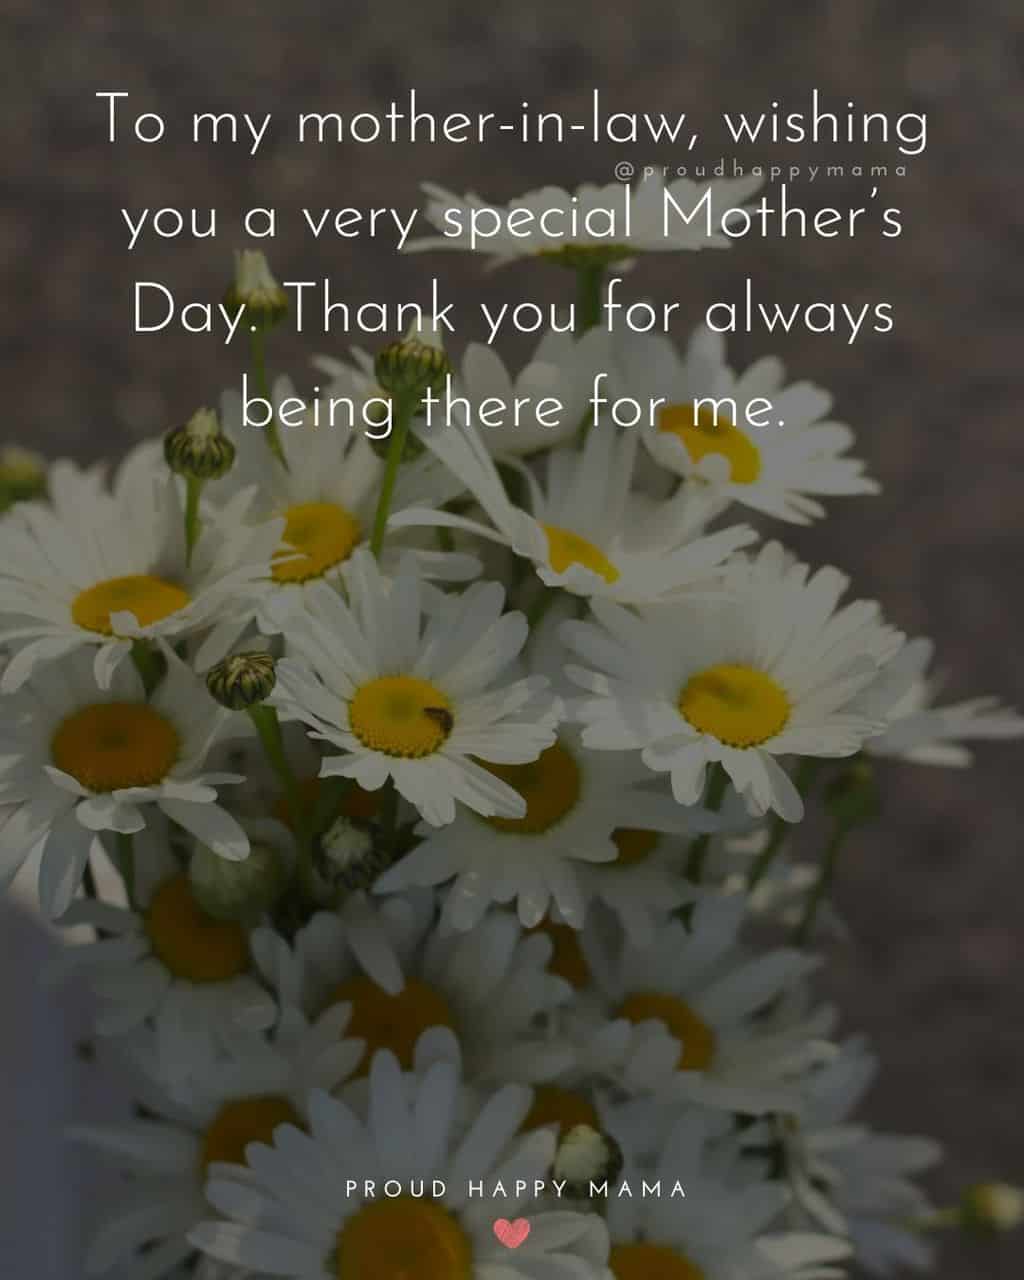 Happy Mothers Day Quotes For Mother In Law - To my mother in law, wishing you a very special Mother’s Day. Thank you for always being